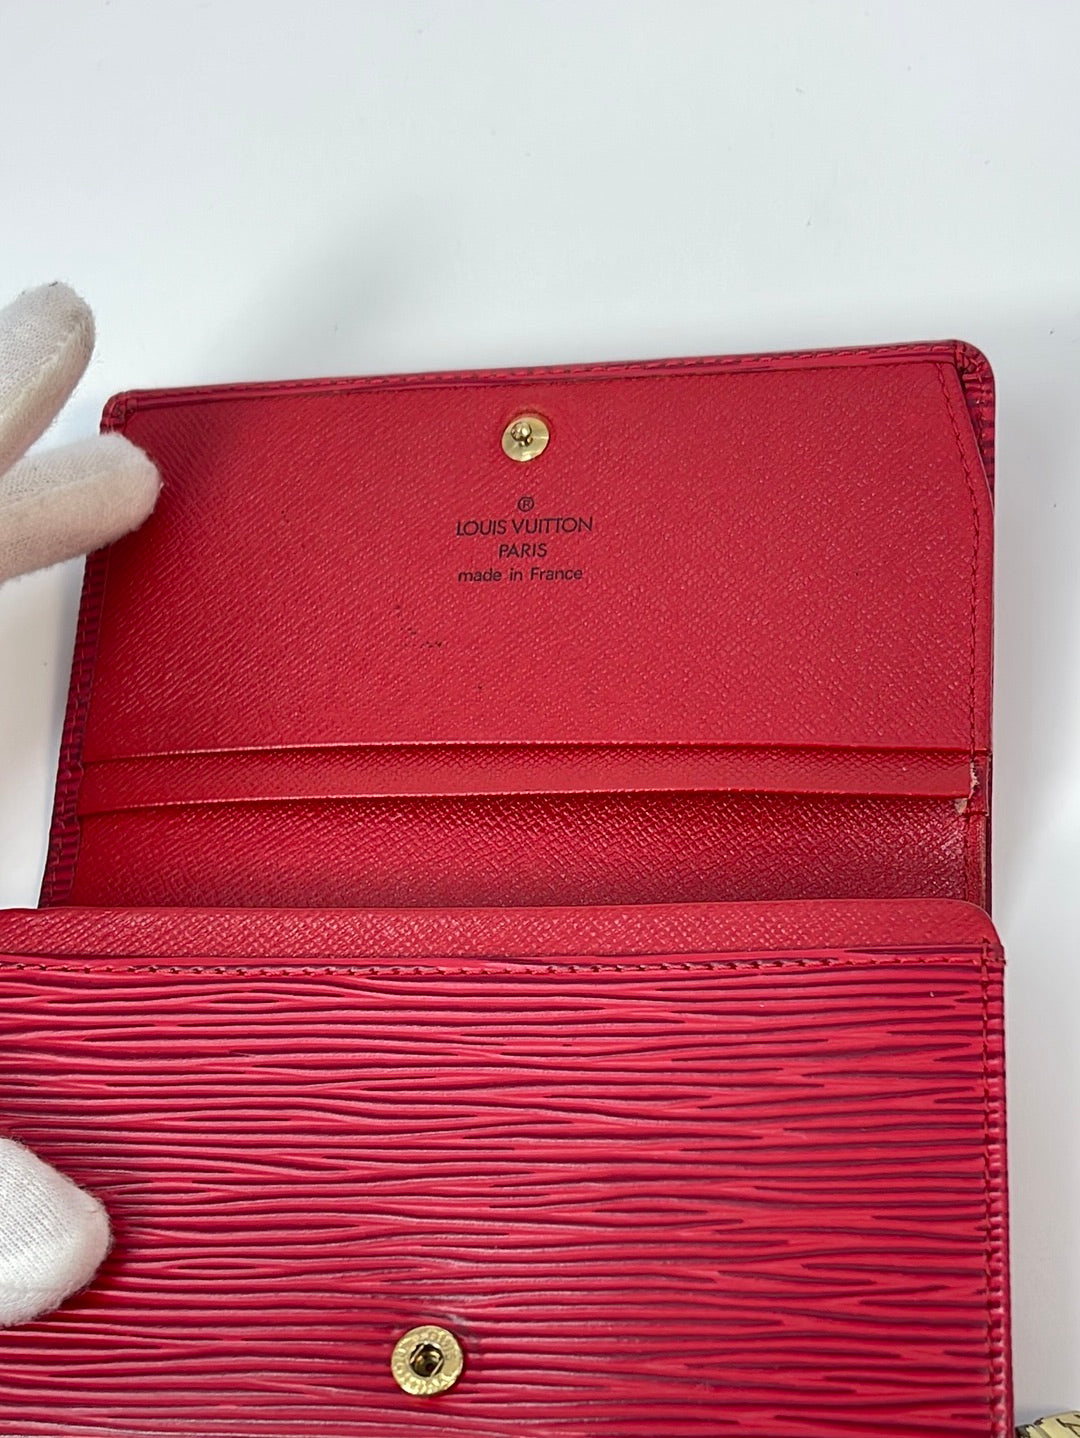 Authentic Louis Vuitton Red Epi Leather Bifold Snap Wallet-$1200